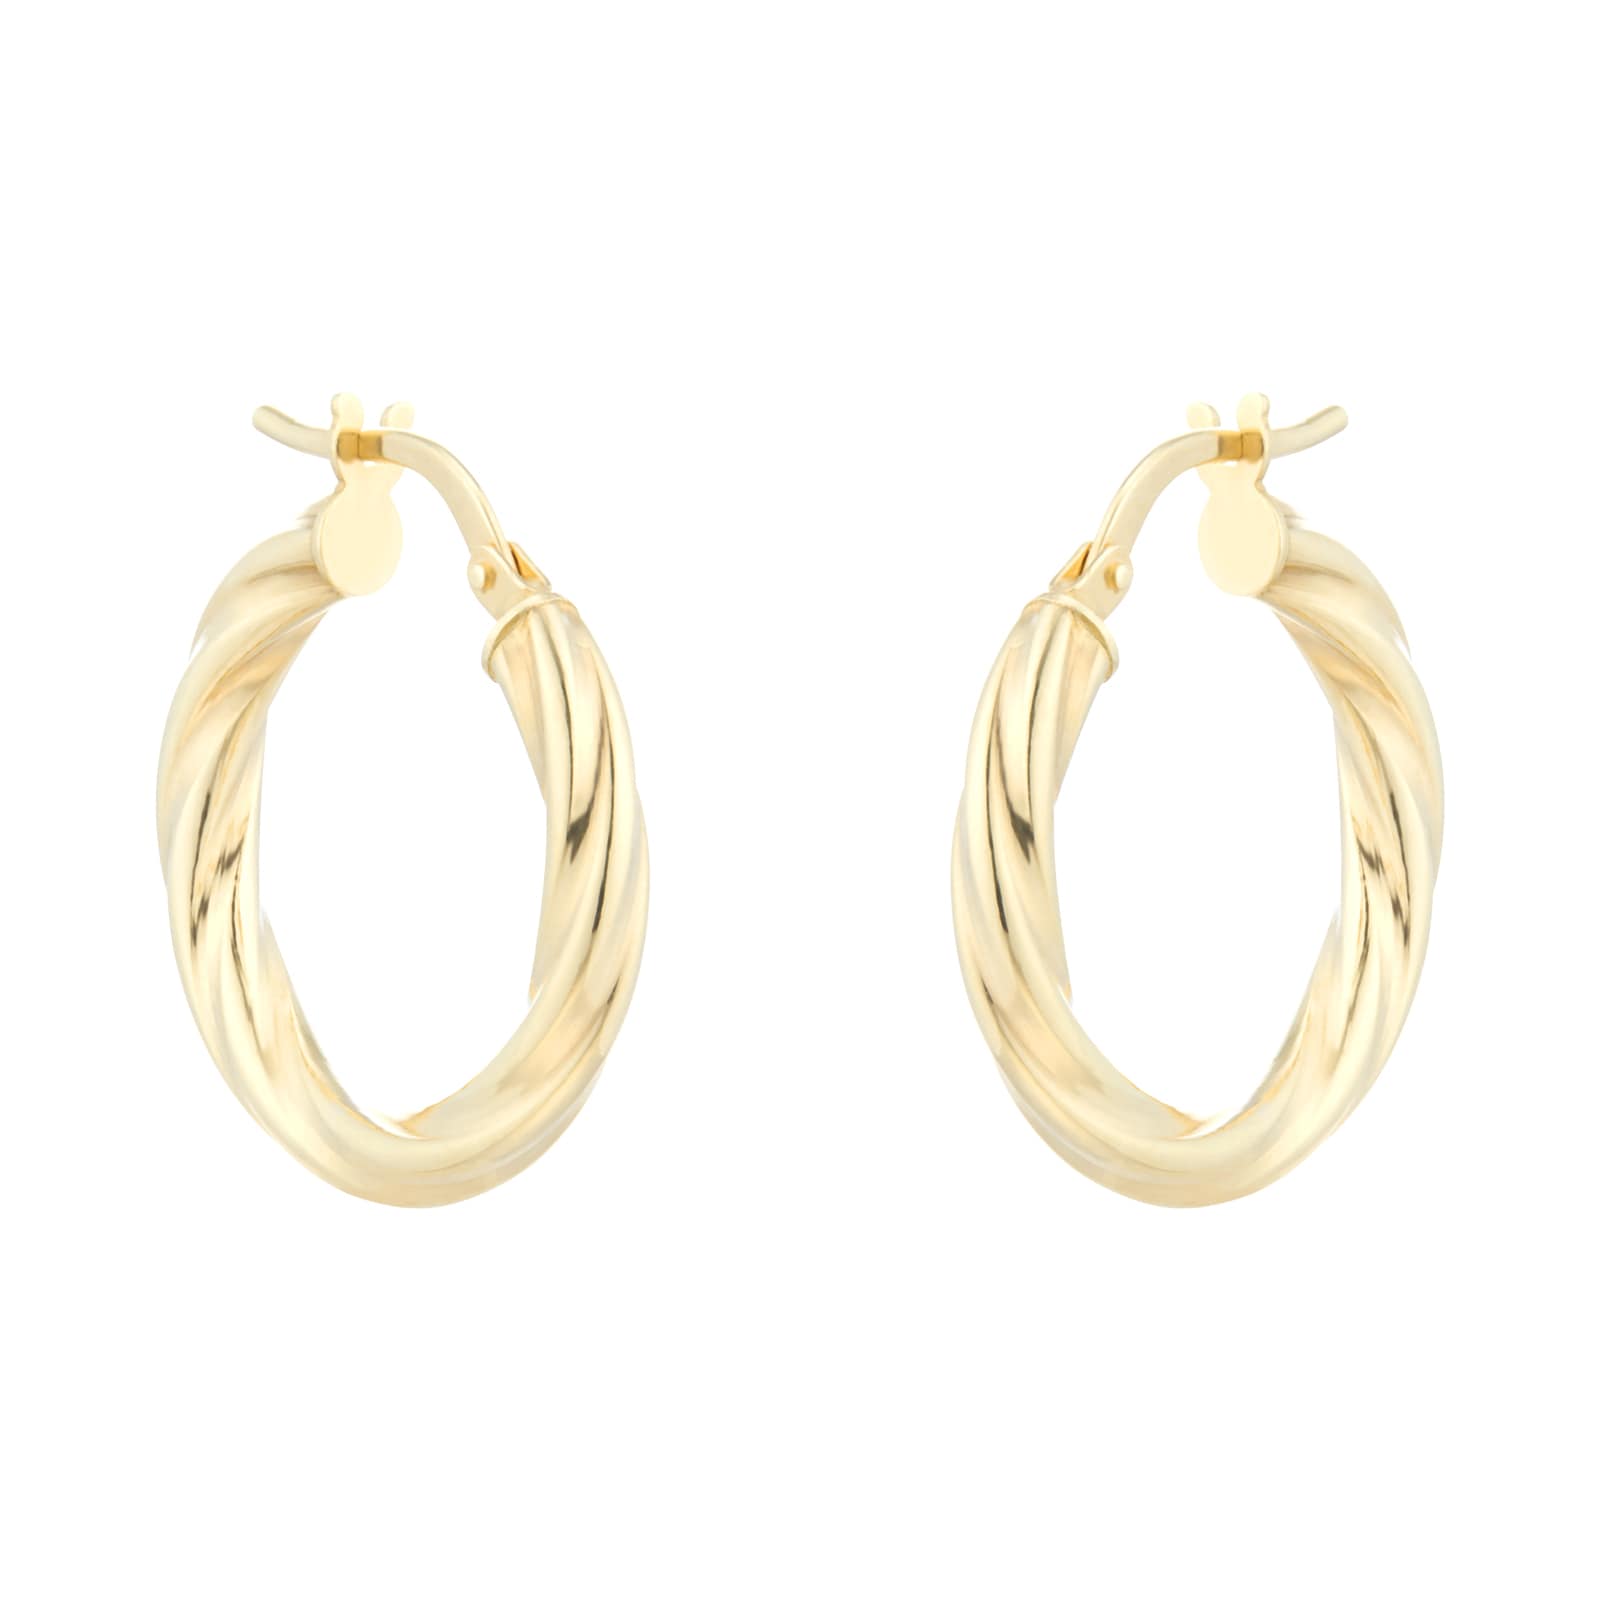 Goldsmiths 18ct Yellow Gold Twisted Creole Earrings 7.52.6319 | Goldsmiths